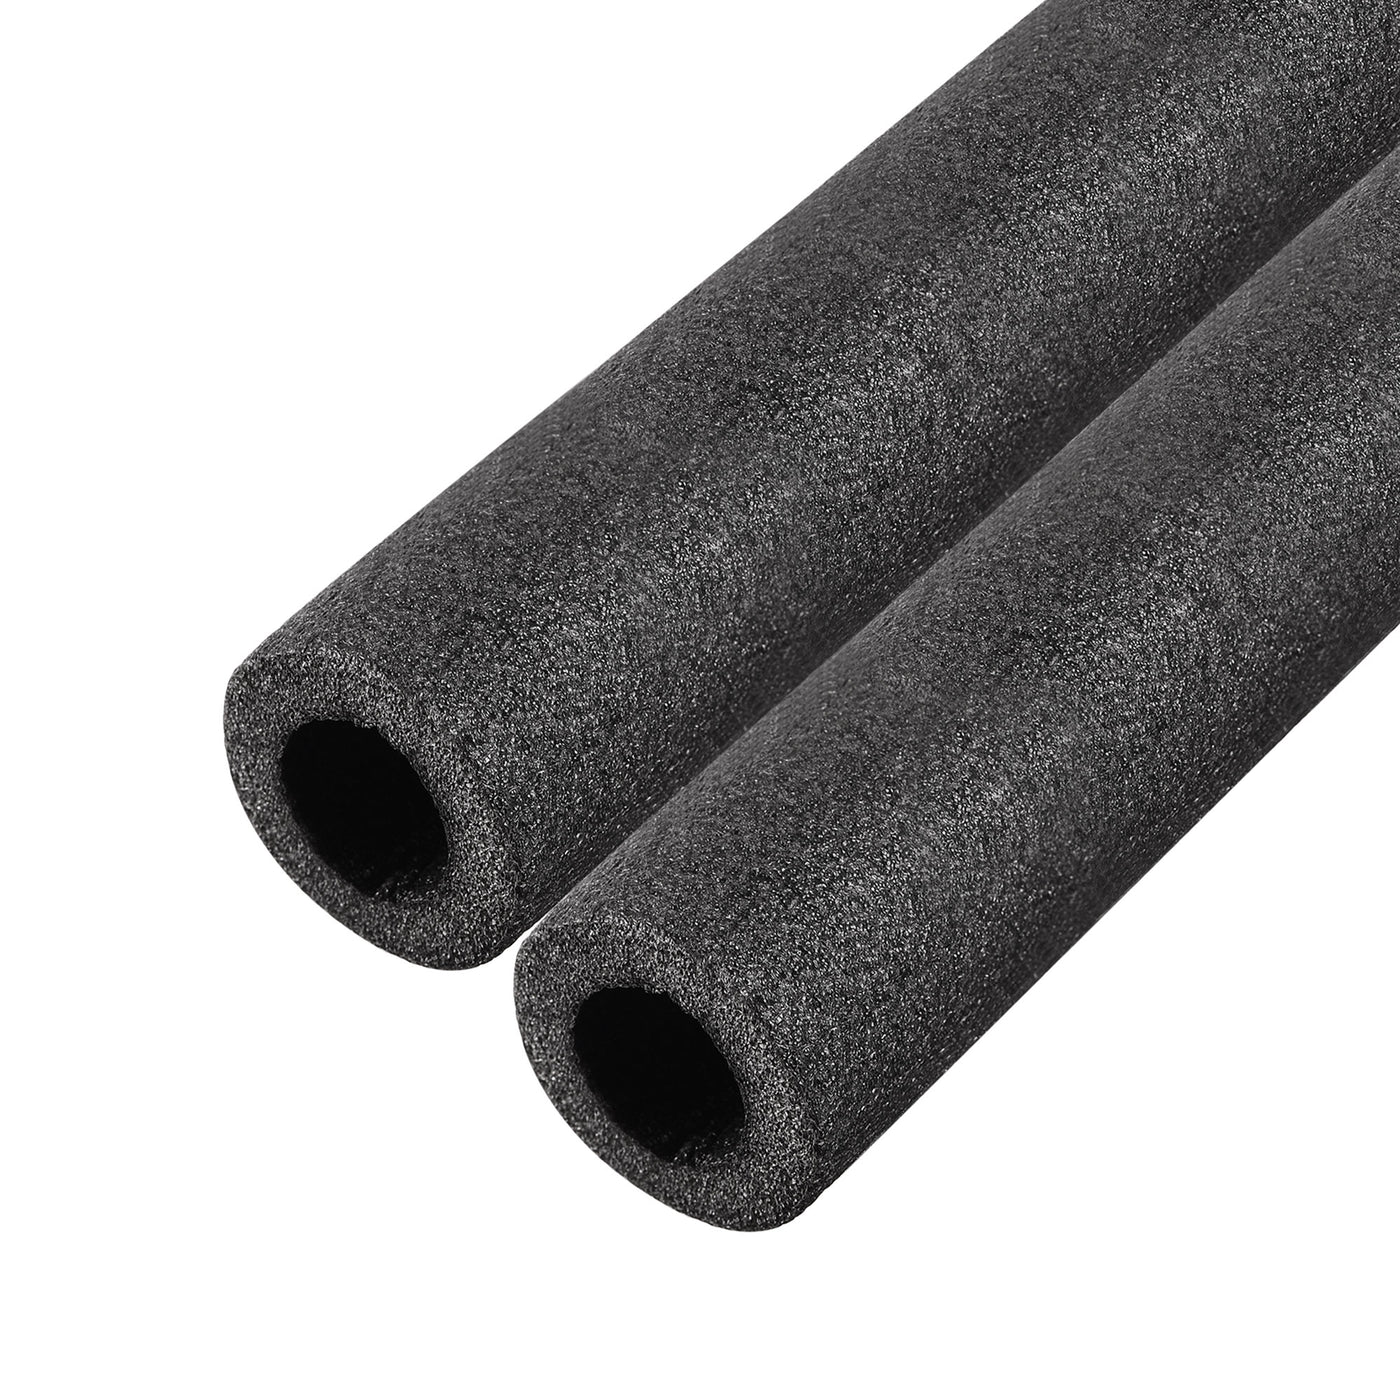 Uxcell Uxcell Foam Tube 1.64 ft Length 0.51in ID 1.44in OD Hollow Polyethylene Black 2pcs